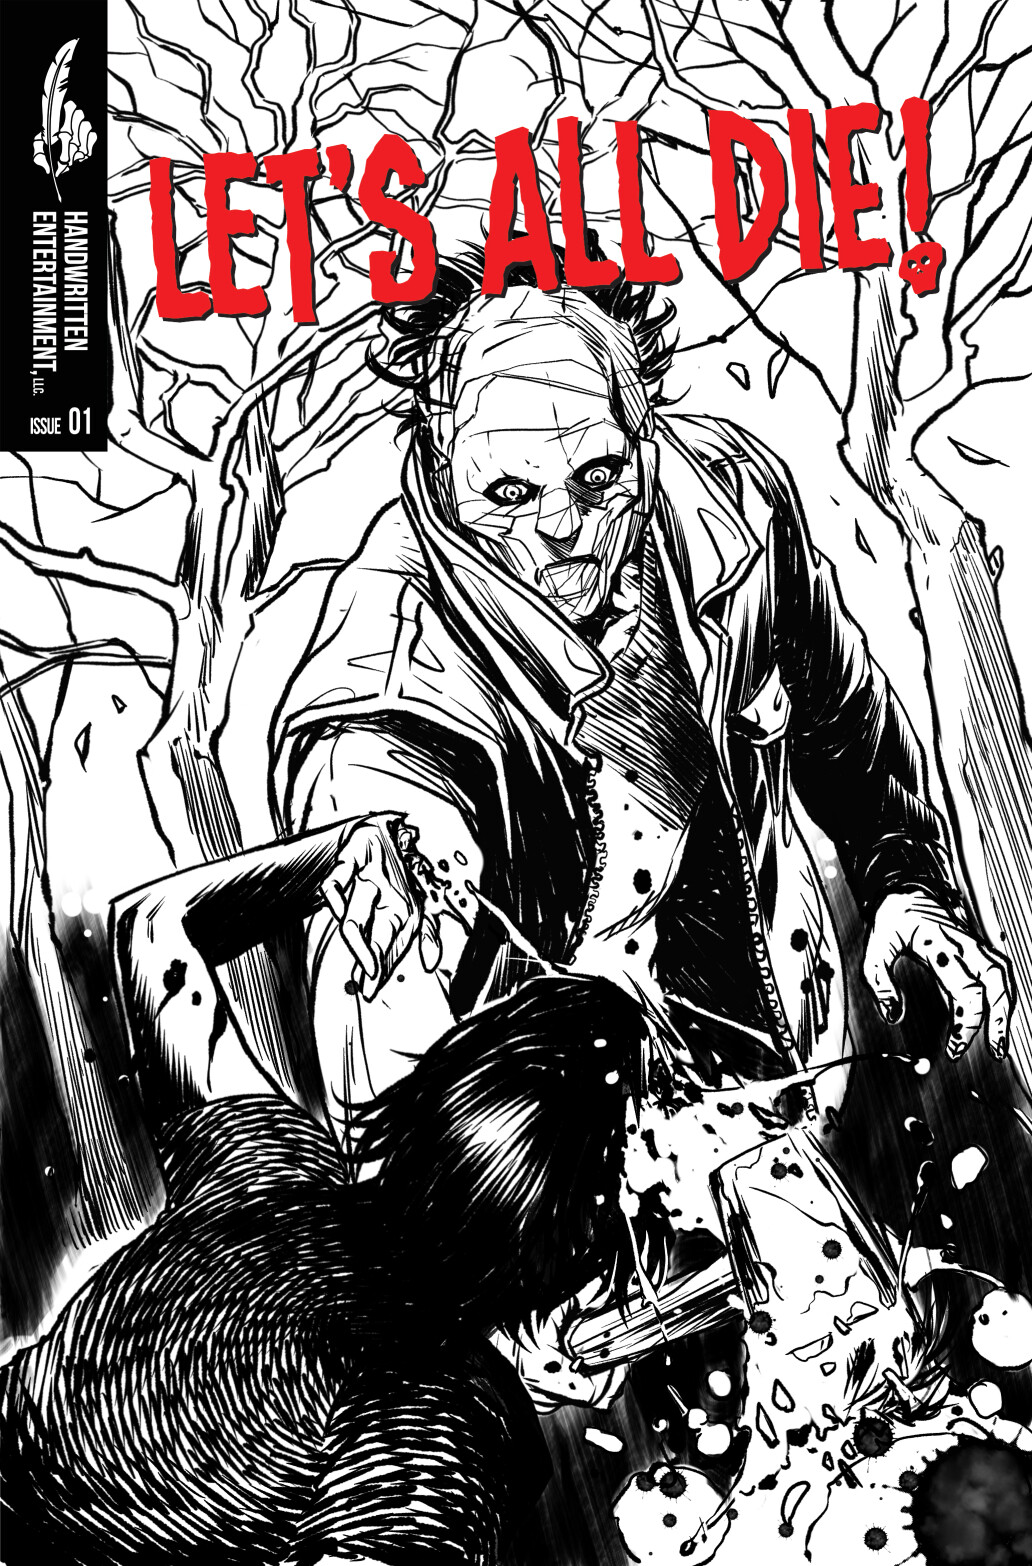 Let's All Die! #1 Variant Cover Texas Frightmare 2019
(Handwritten Entertainment 2019)